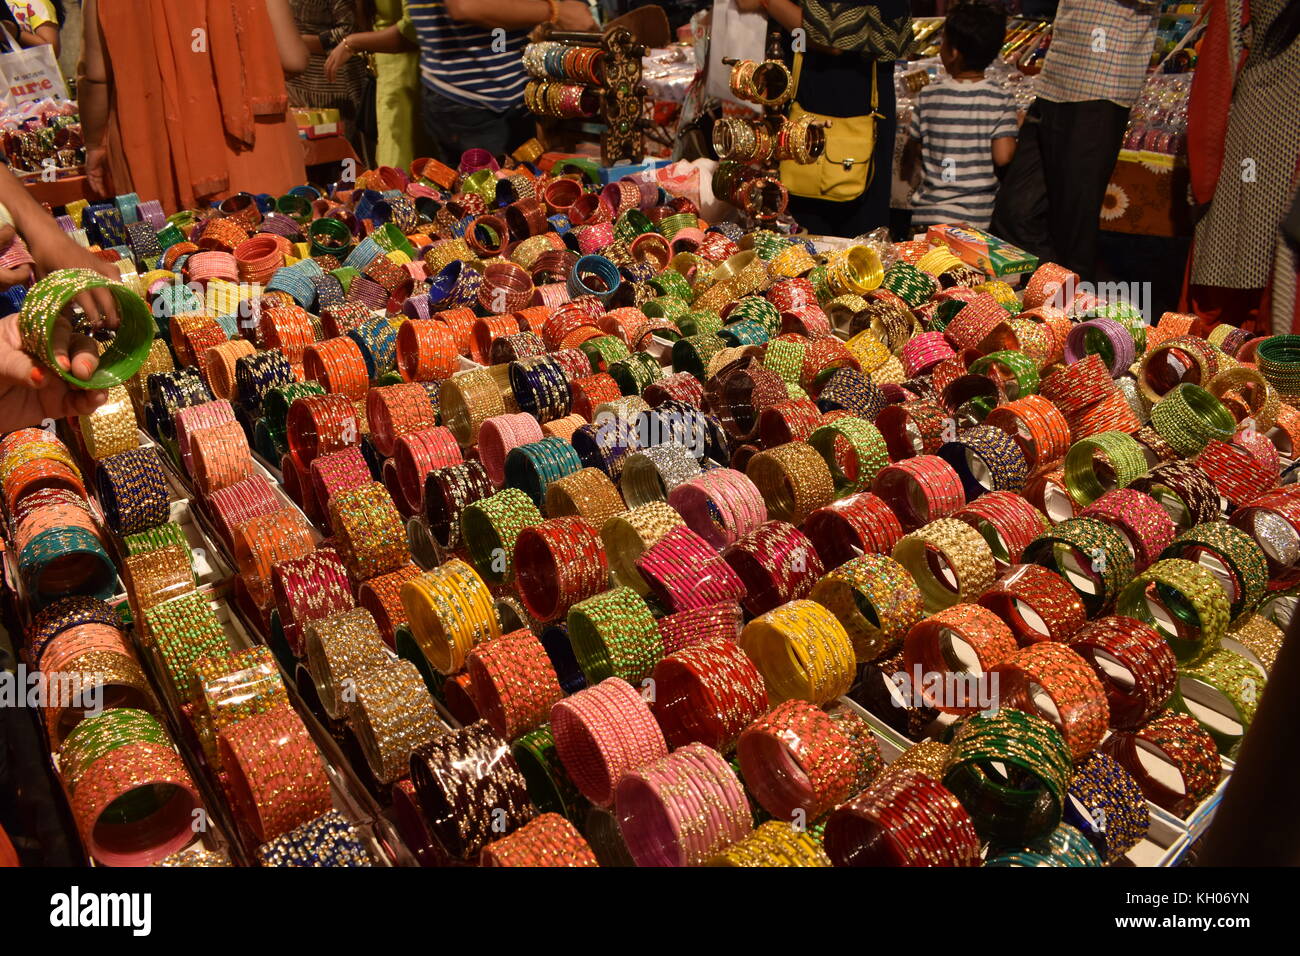 A stall selling Bangles before the festival of Karva Chauth in Panchkula, Haryana, India Stock Photo